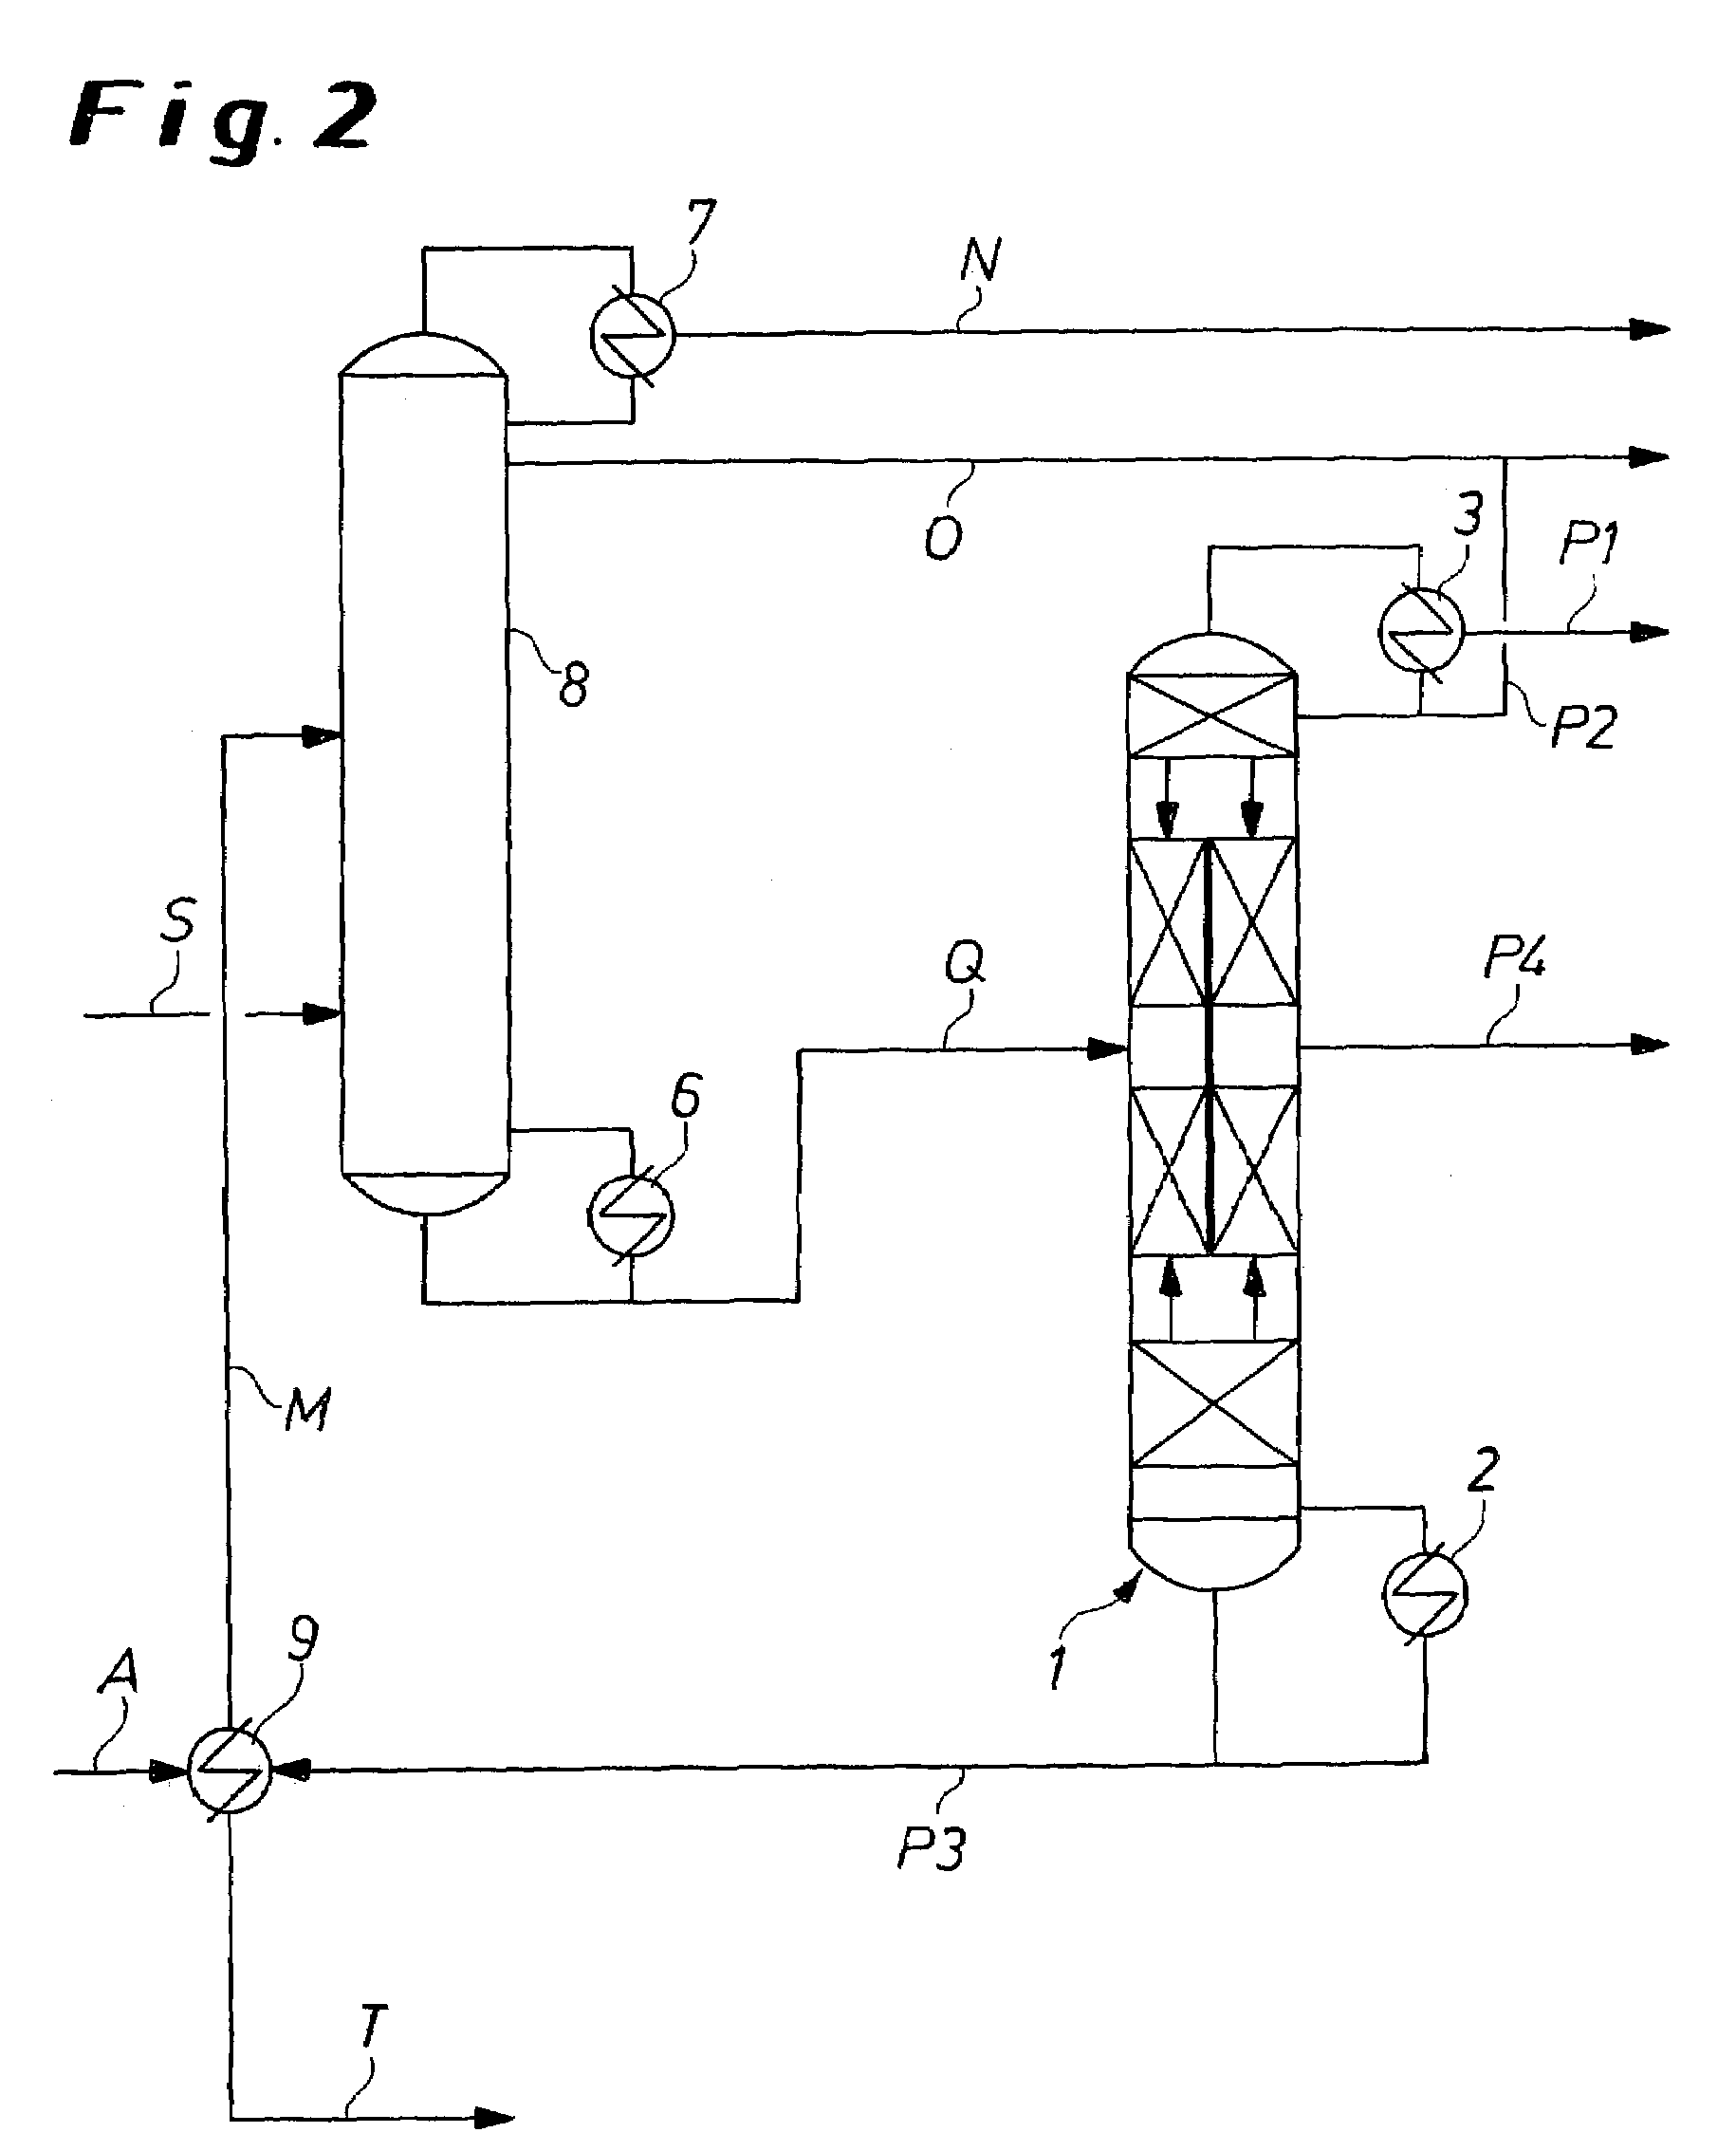 Process for the purification of mixtures of toluenediisocyanate incorporating a dividing-wall distillation column